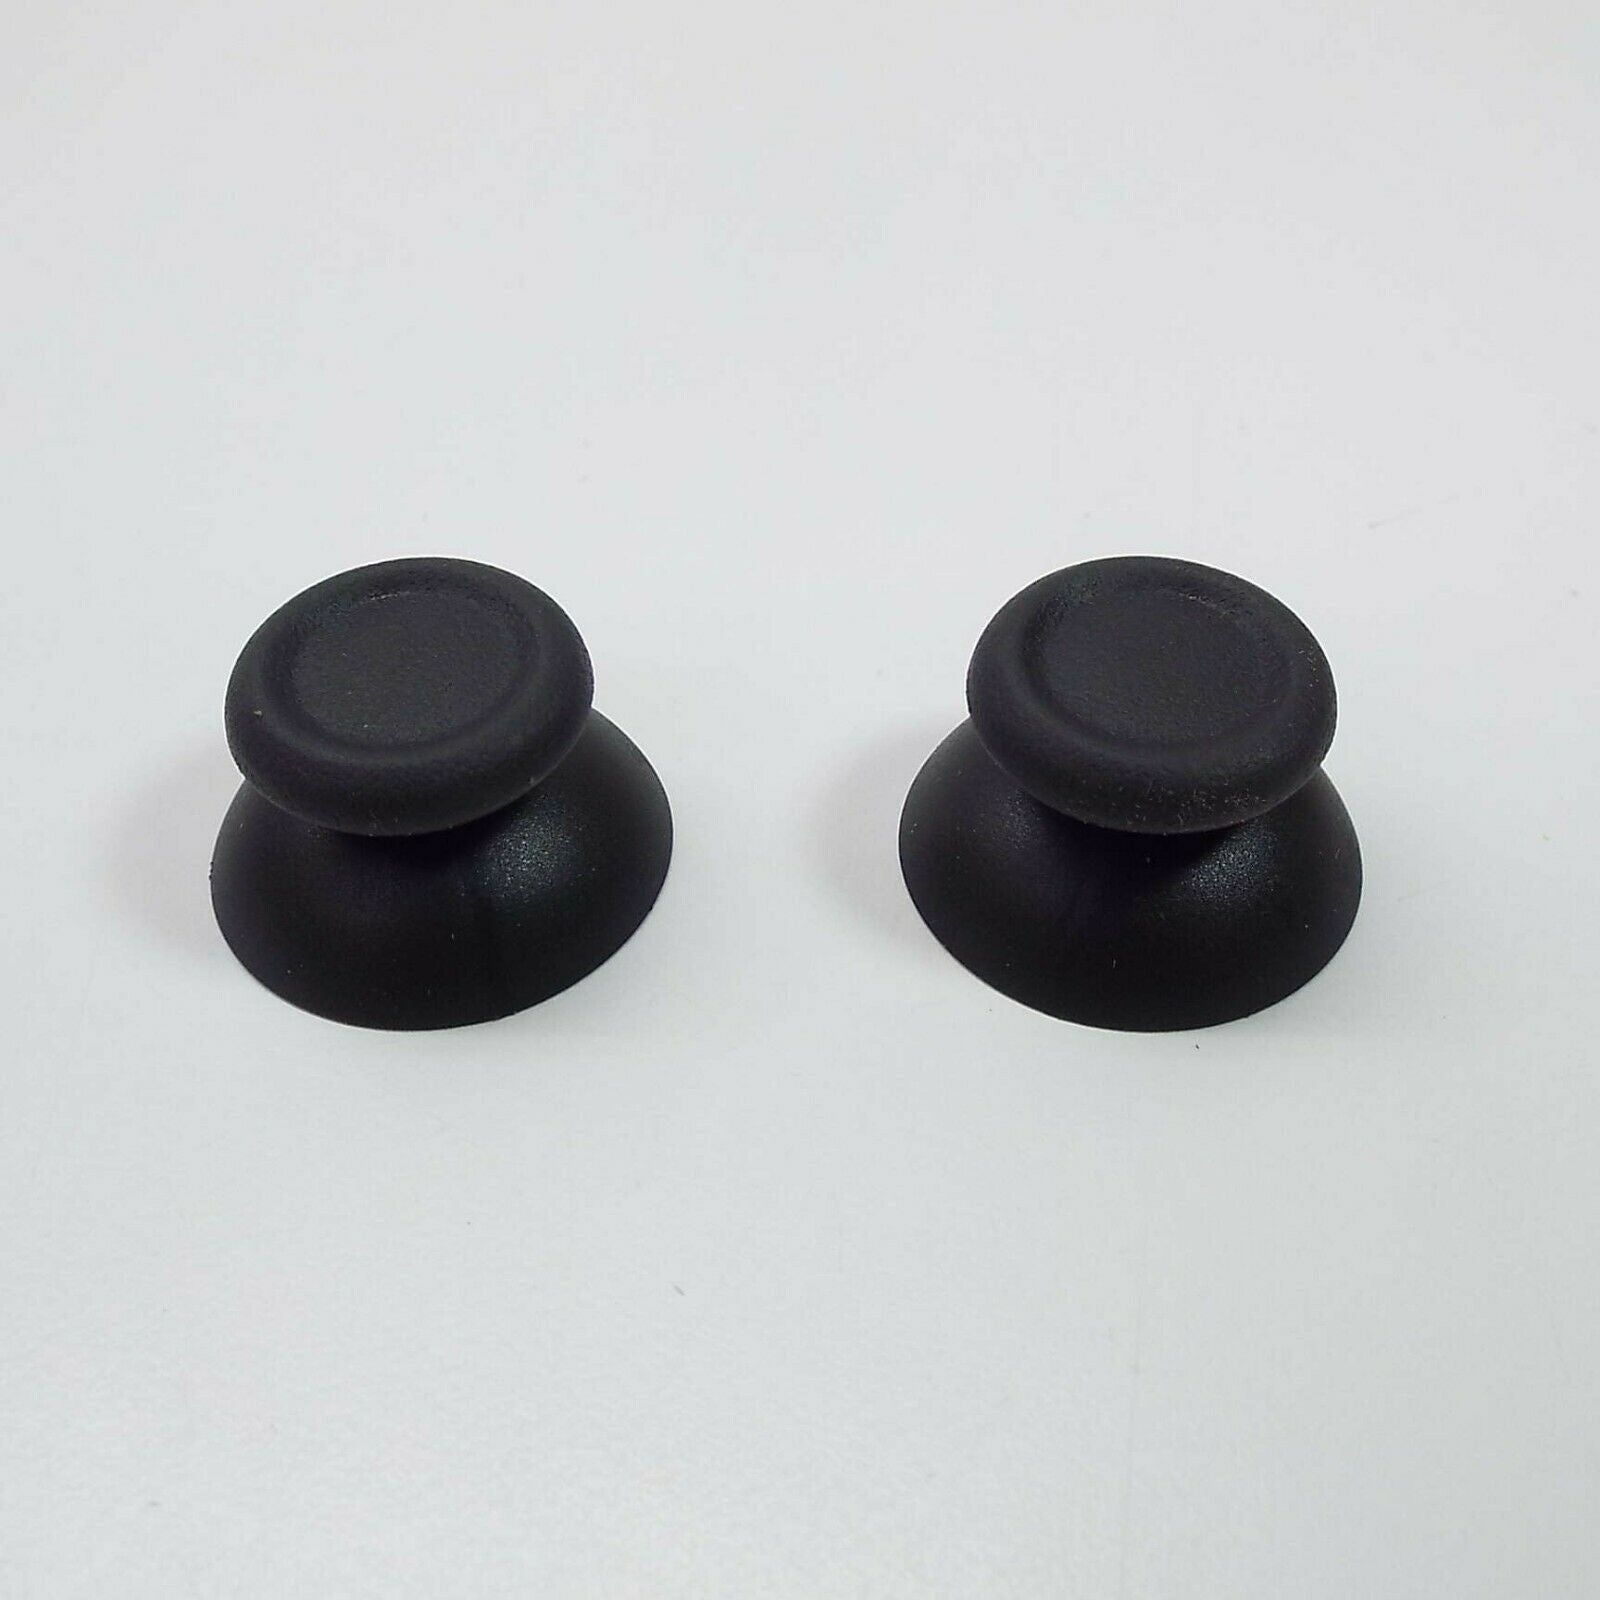 PS4 Controller Replacement Black Thumb Sticks (Two Pack)